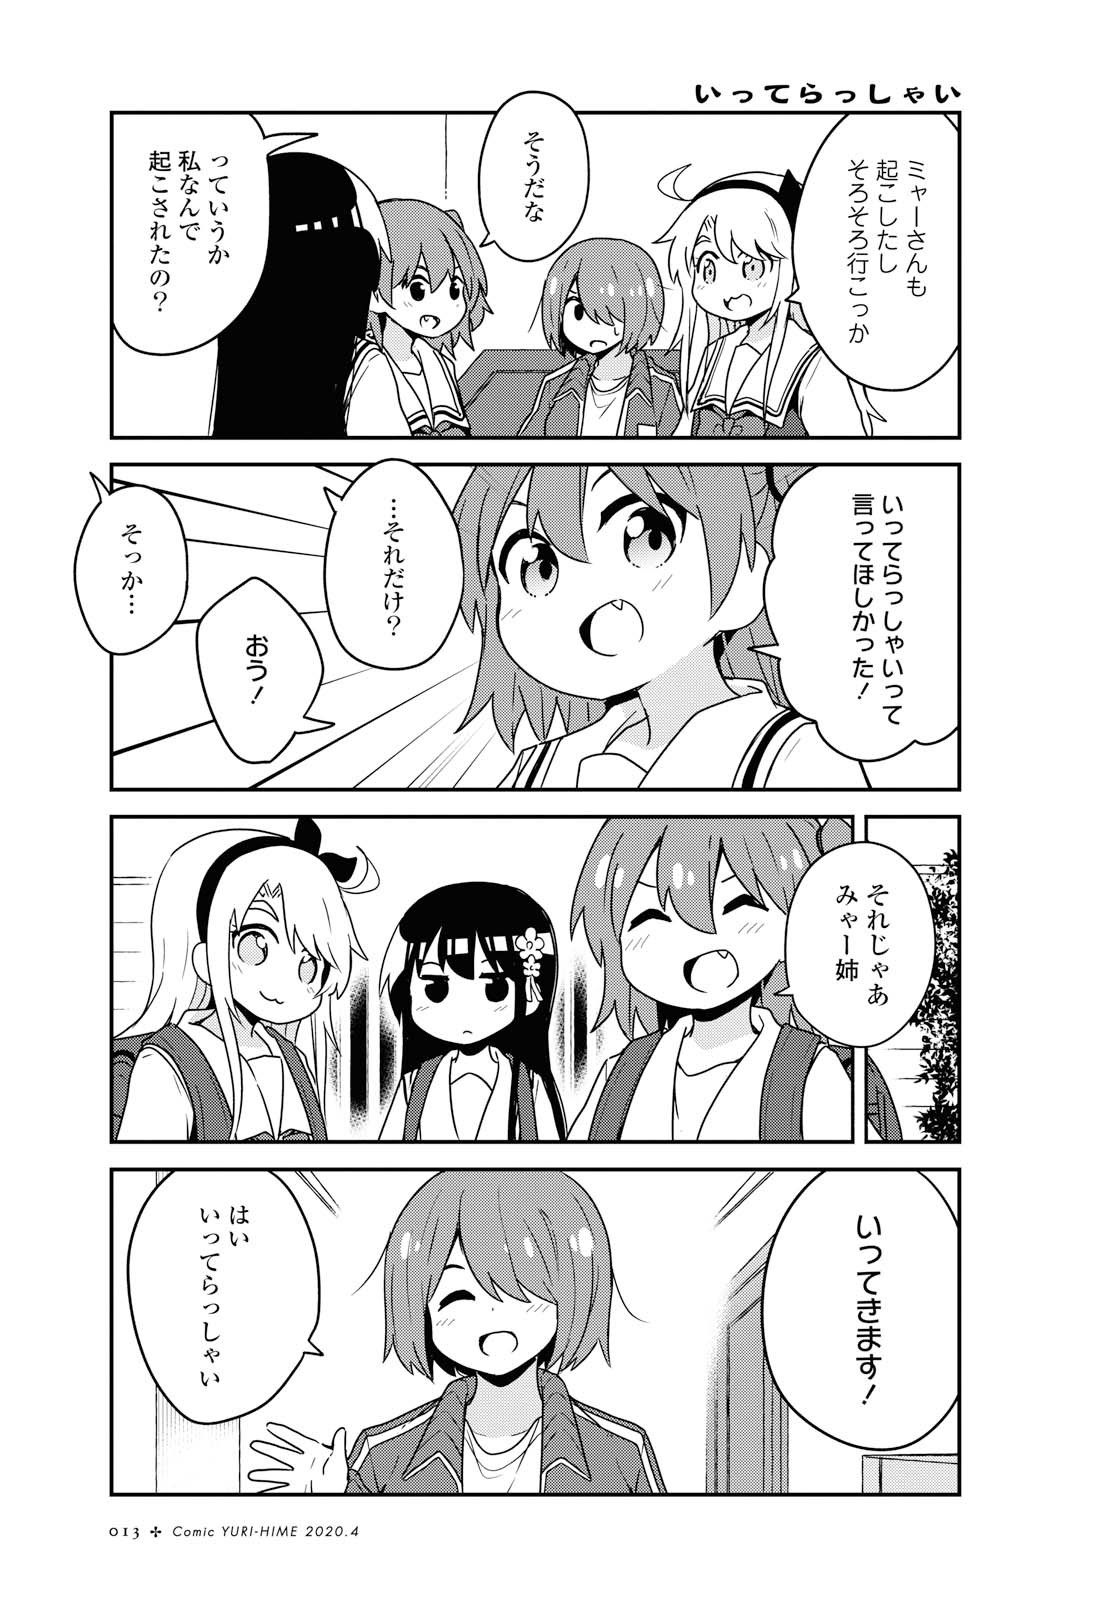 Wataten! An Angel Flew Down to Me 私に天使が舞い降りた！ 第61話 - Page 6